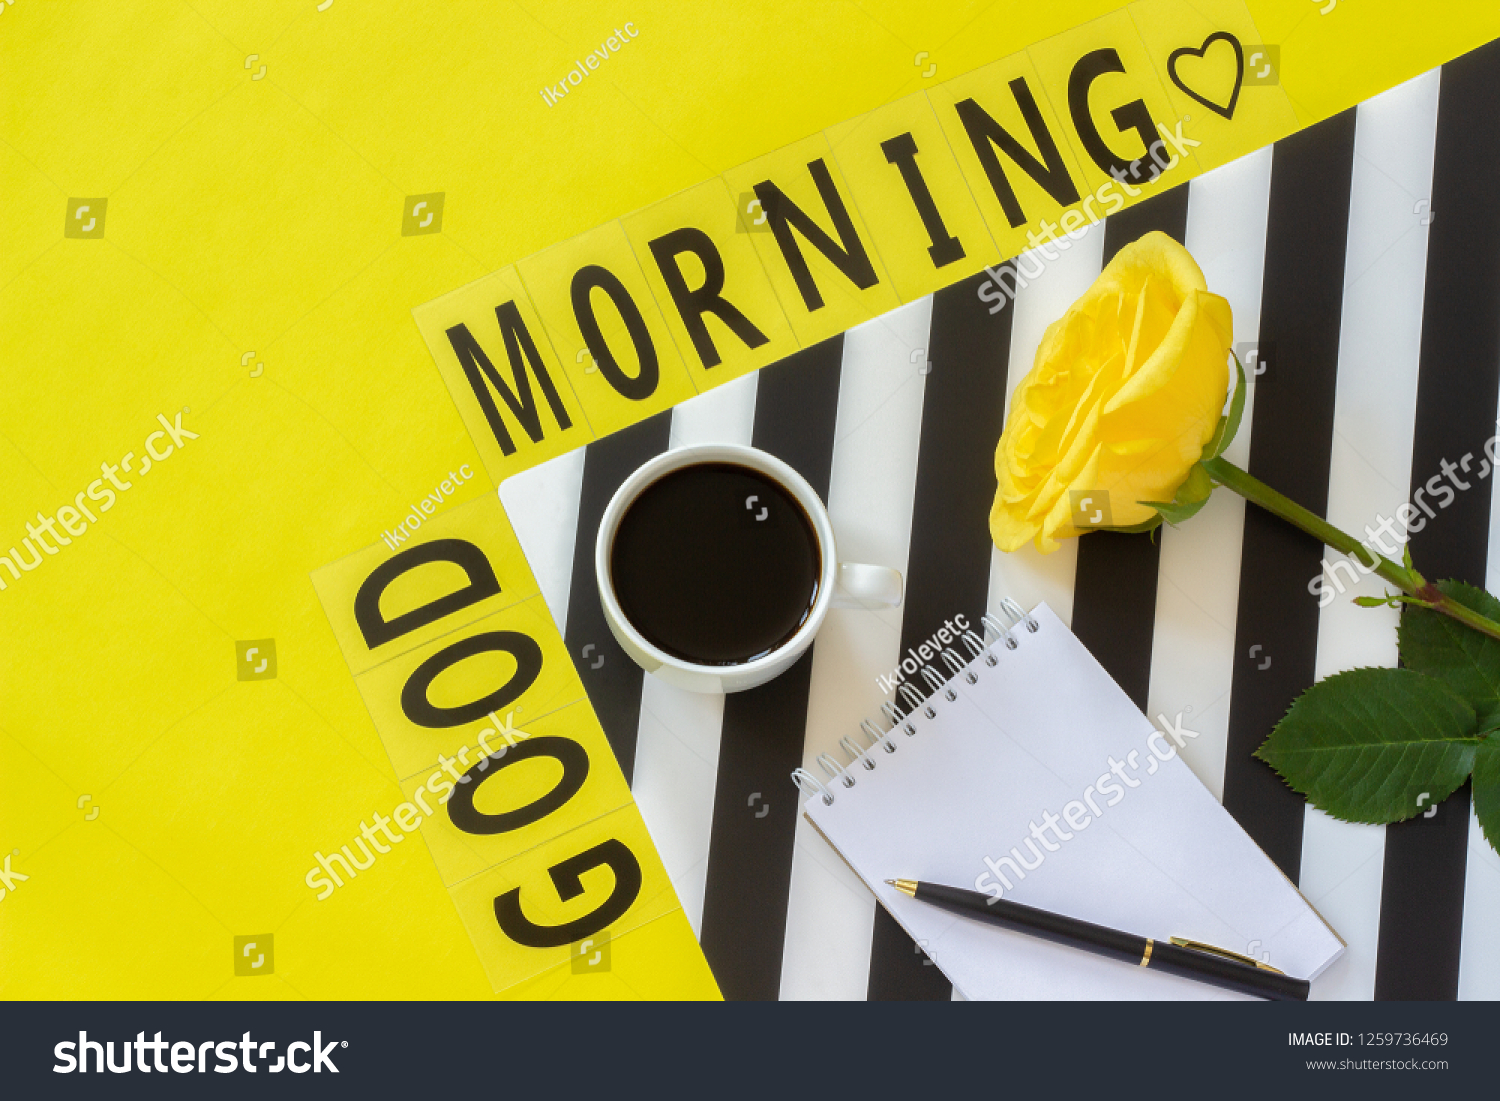 Download Text Good Morning Cup Coffee Yellow Business Finance Stock Image 1259736469 Yellowimages Mockups